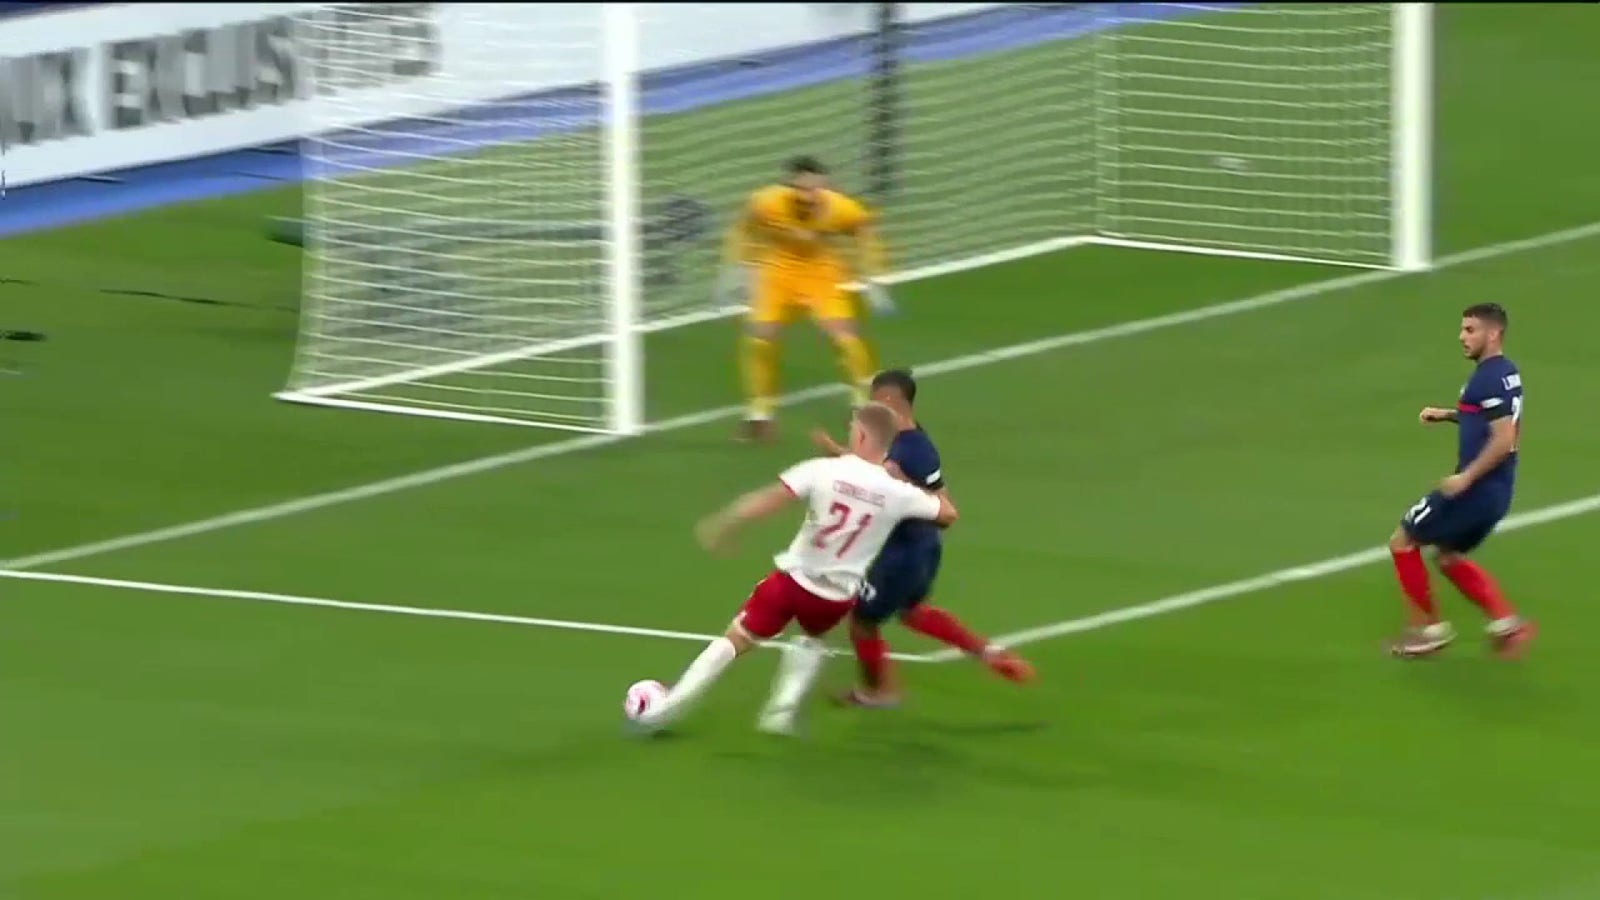 Andreas Cornelius converts from a tough angle to push Denmark ahead